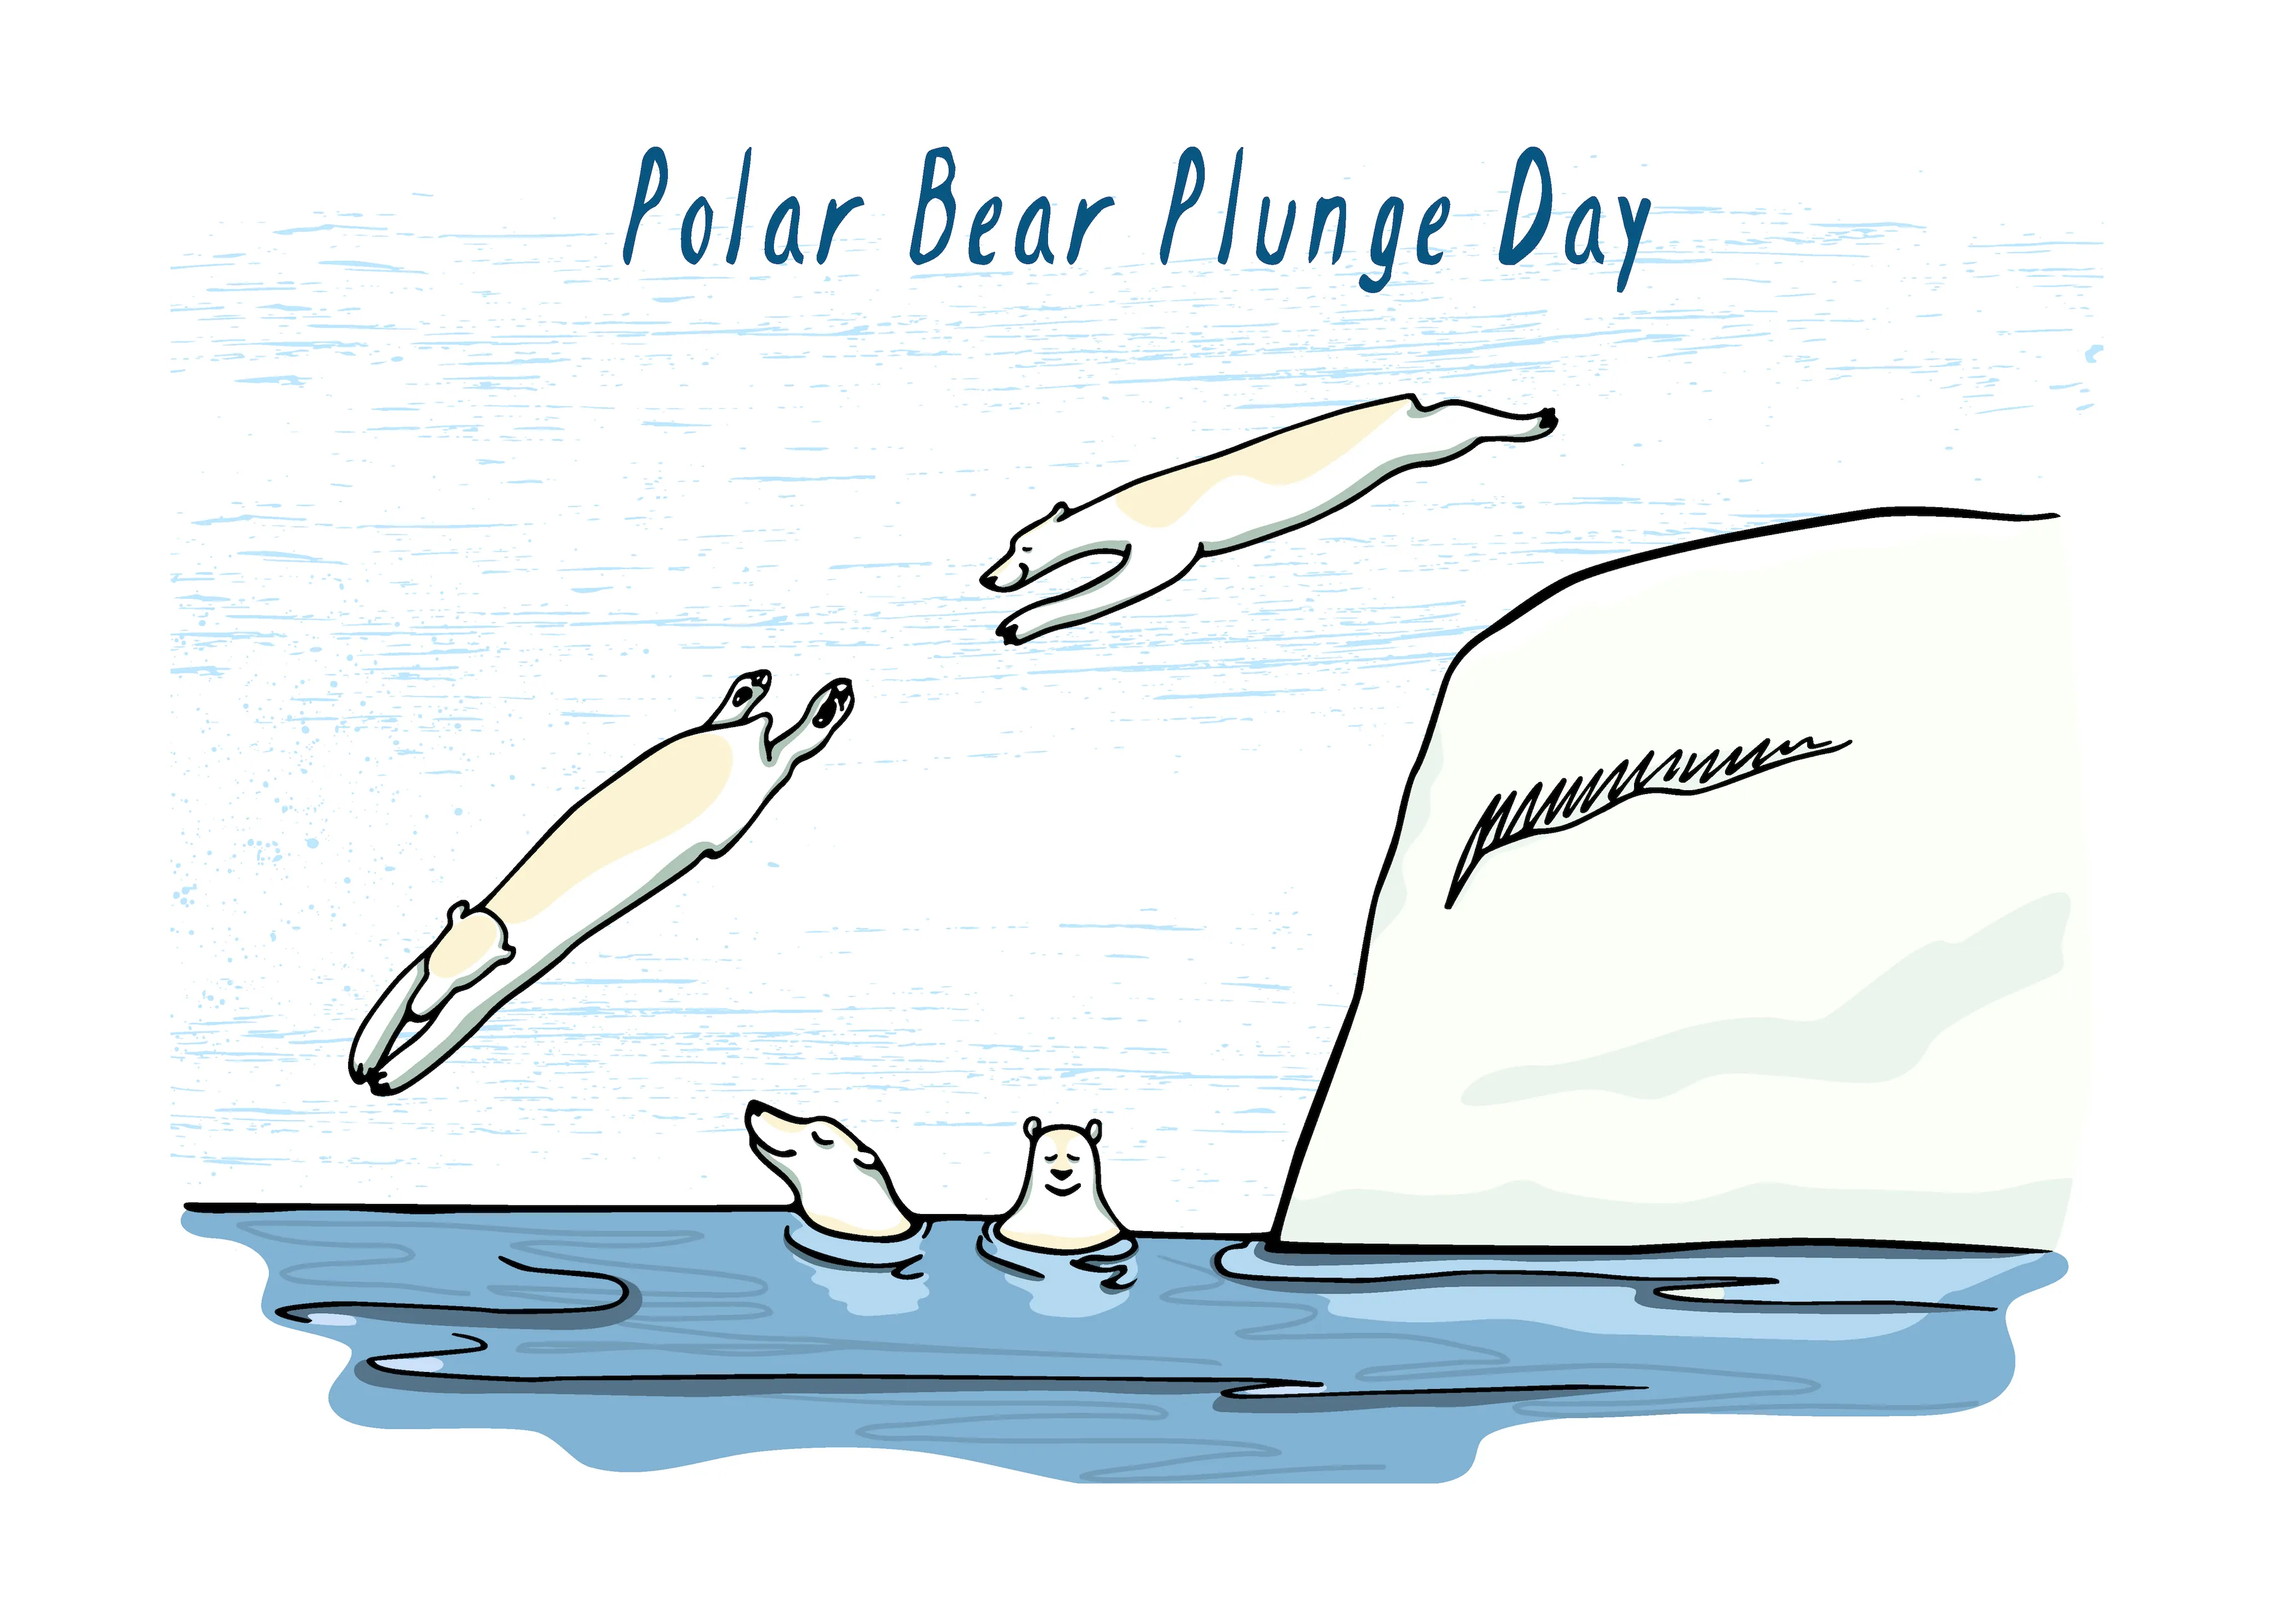 Cool Facts About New Year’s Polar Bear Dips